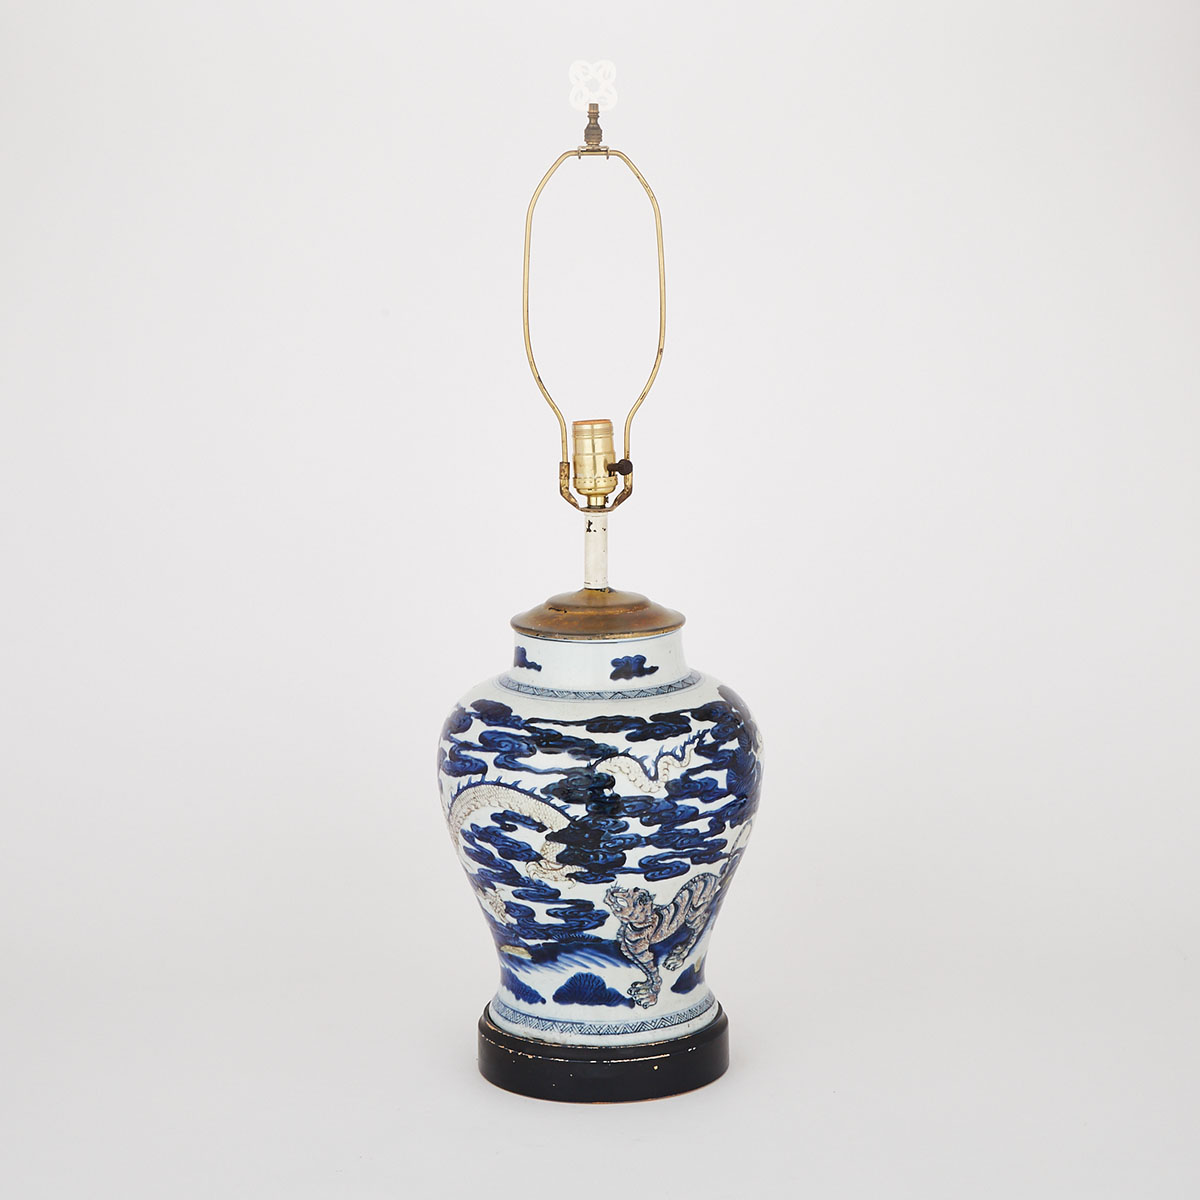 A Blue and White Vase Lamp, 19th/20th Century